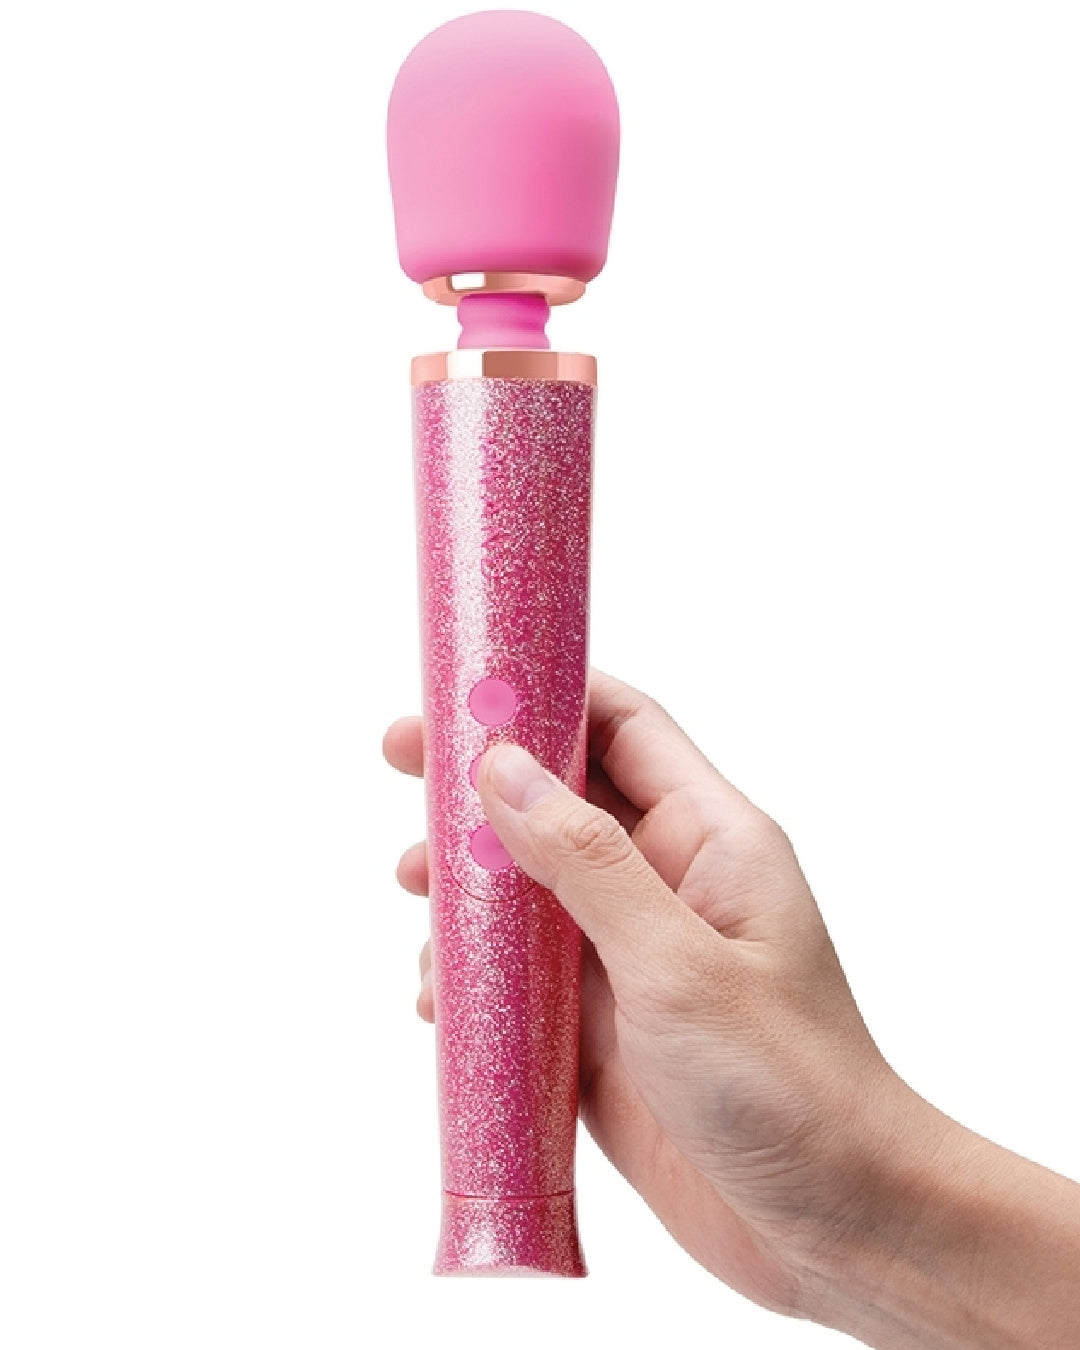 Le Wand All That Glimmers Wand Vibrator Set - Pink held in hand 